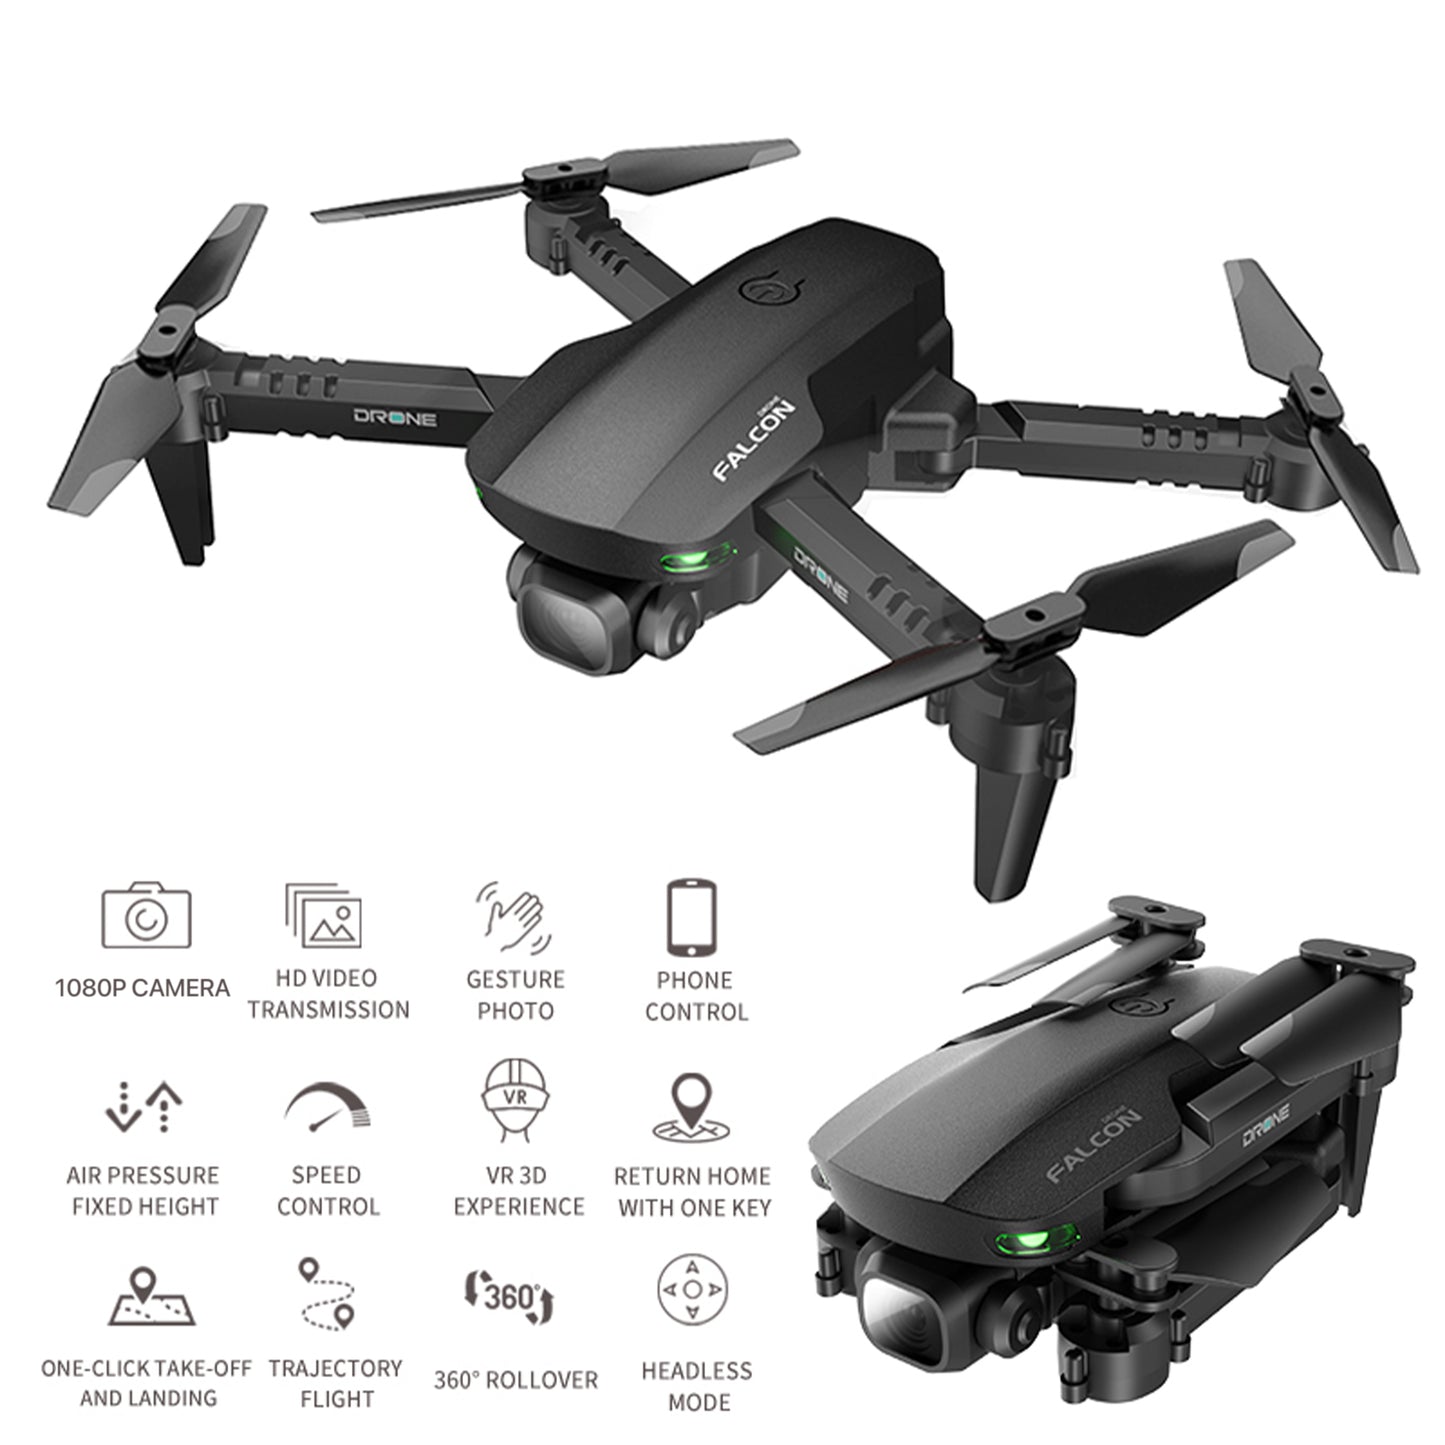 REFURBISHED: The Bigly Brothers E58 Mark III Falcon Mini Drone With HD Camera Headless Mode Professional Foldable Quadcopter Phone Control RC Drone